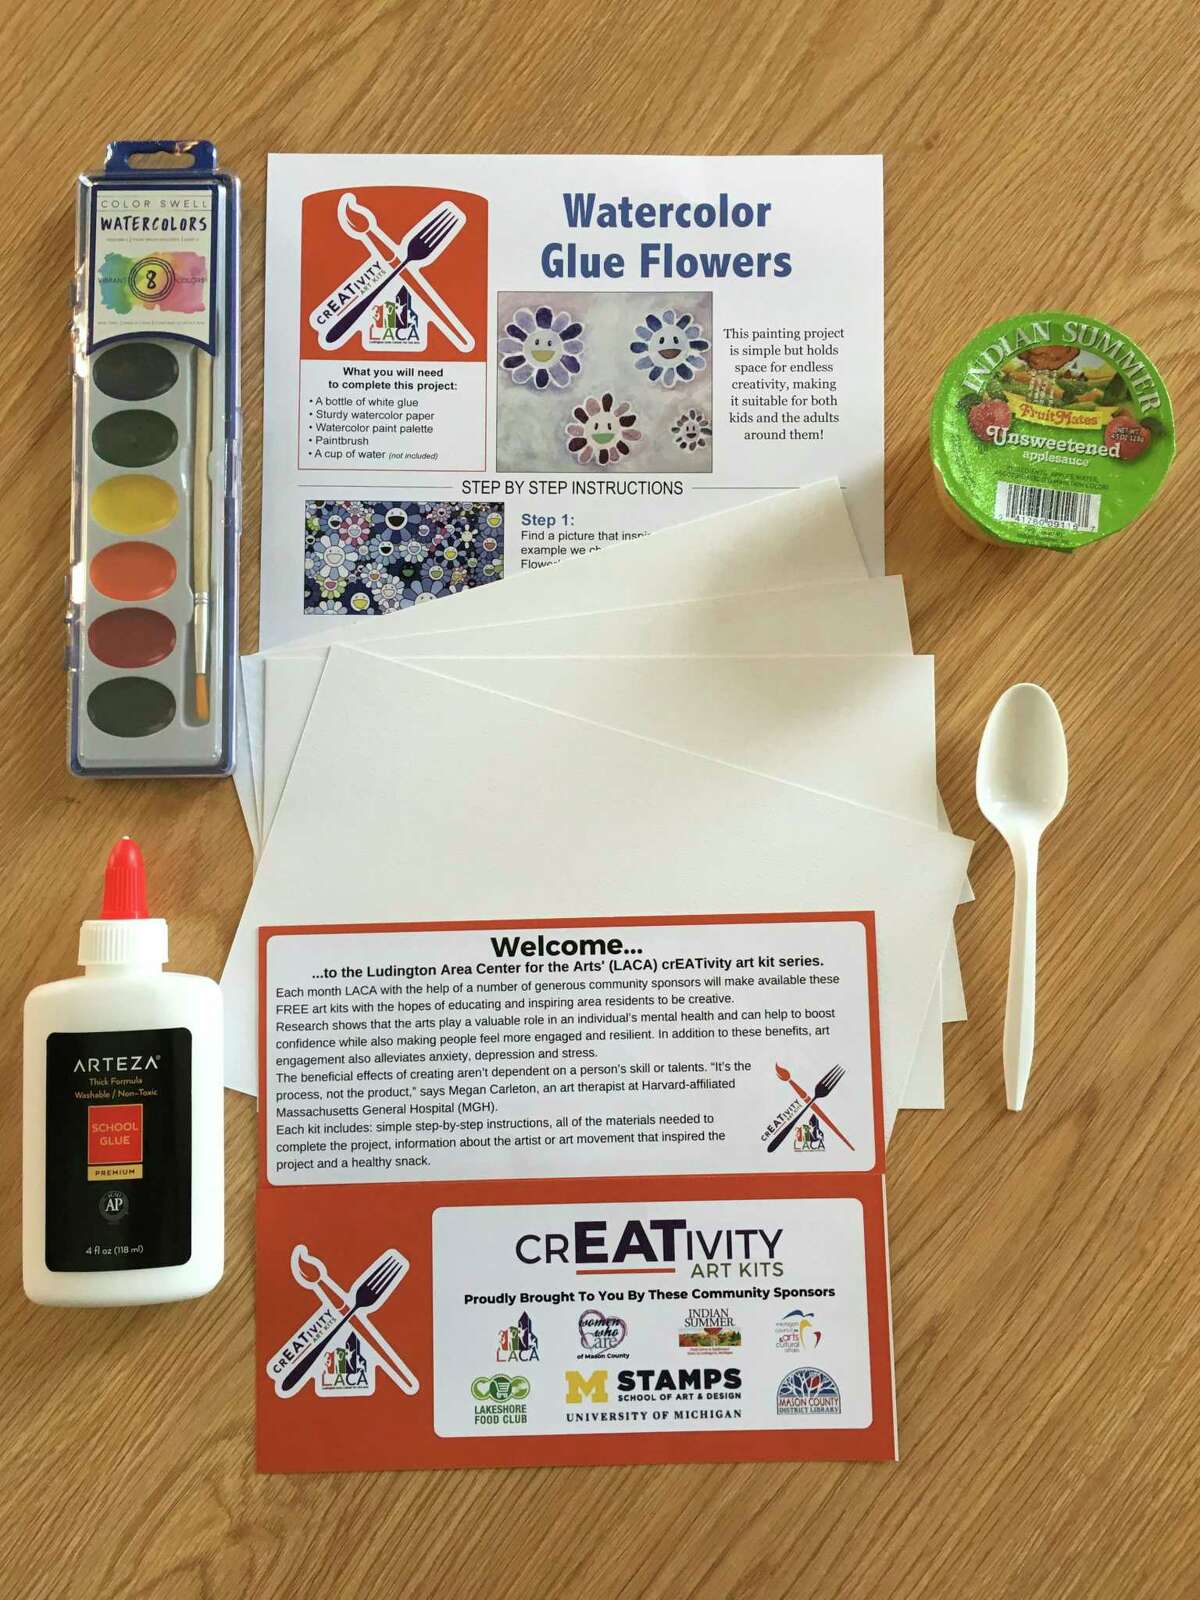 The first kit will feature a watercolor glue flowers project inspired by the Japanese contemporary artist Takashi Murakami. In addition to step-by-step instructions the kit also includes a watercolor paint set and brush, a 4-ounce bottle of white glue, four pieces of watercolor paper, an individual serving of applesauce and a spoon. (Courtesy photo)